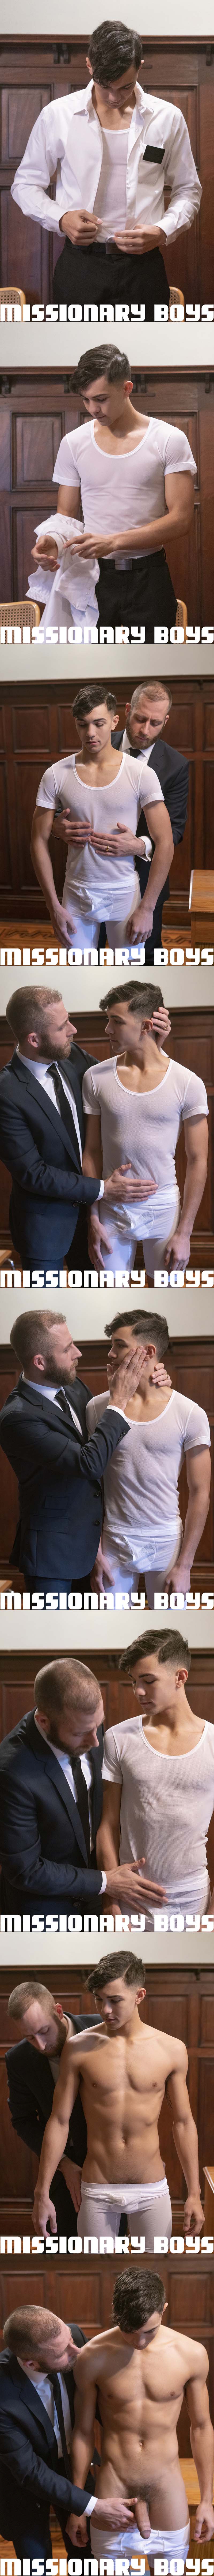 THE CALLING: Elder Rim (with President Lewis a.k.a. Joel Someone) at MissionaryBoys